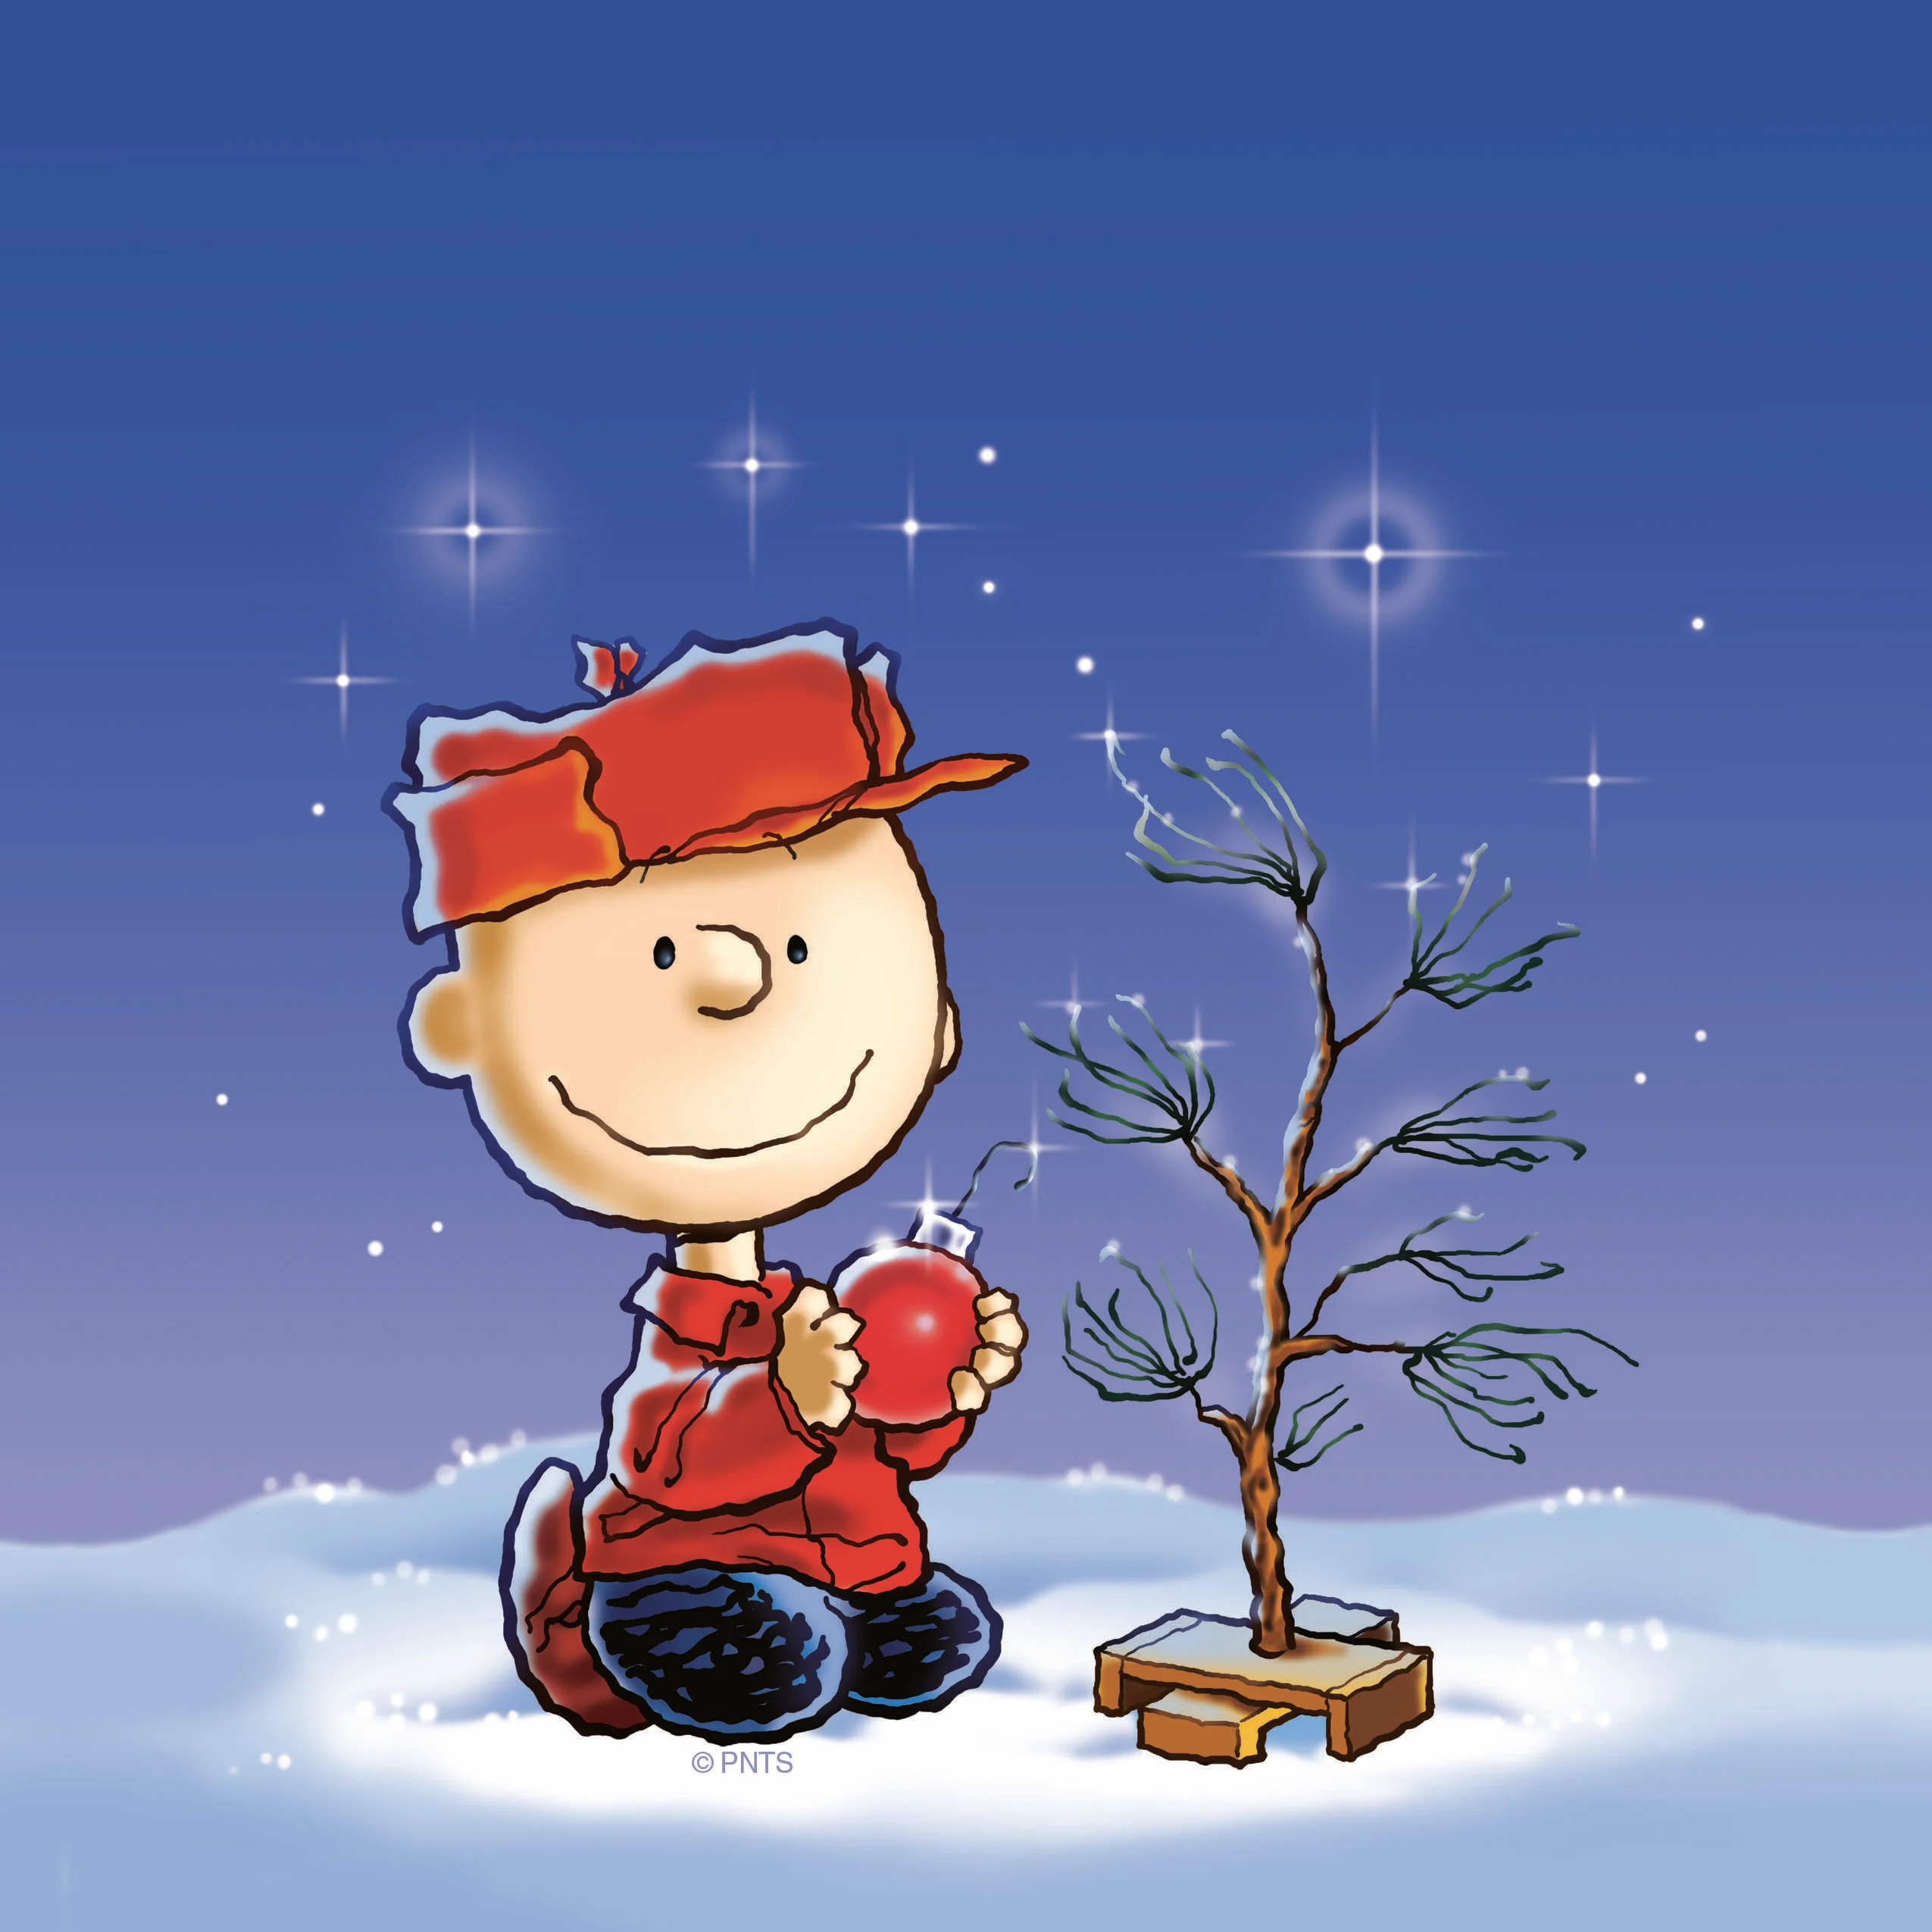 Background Cute Christmas Wallpaper